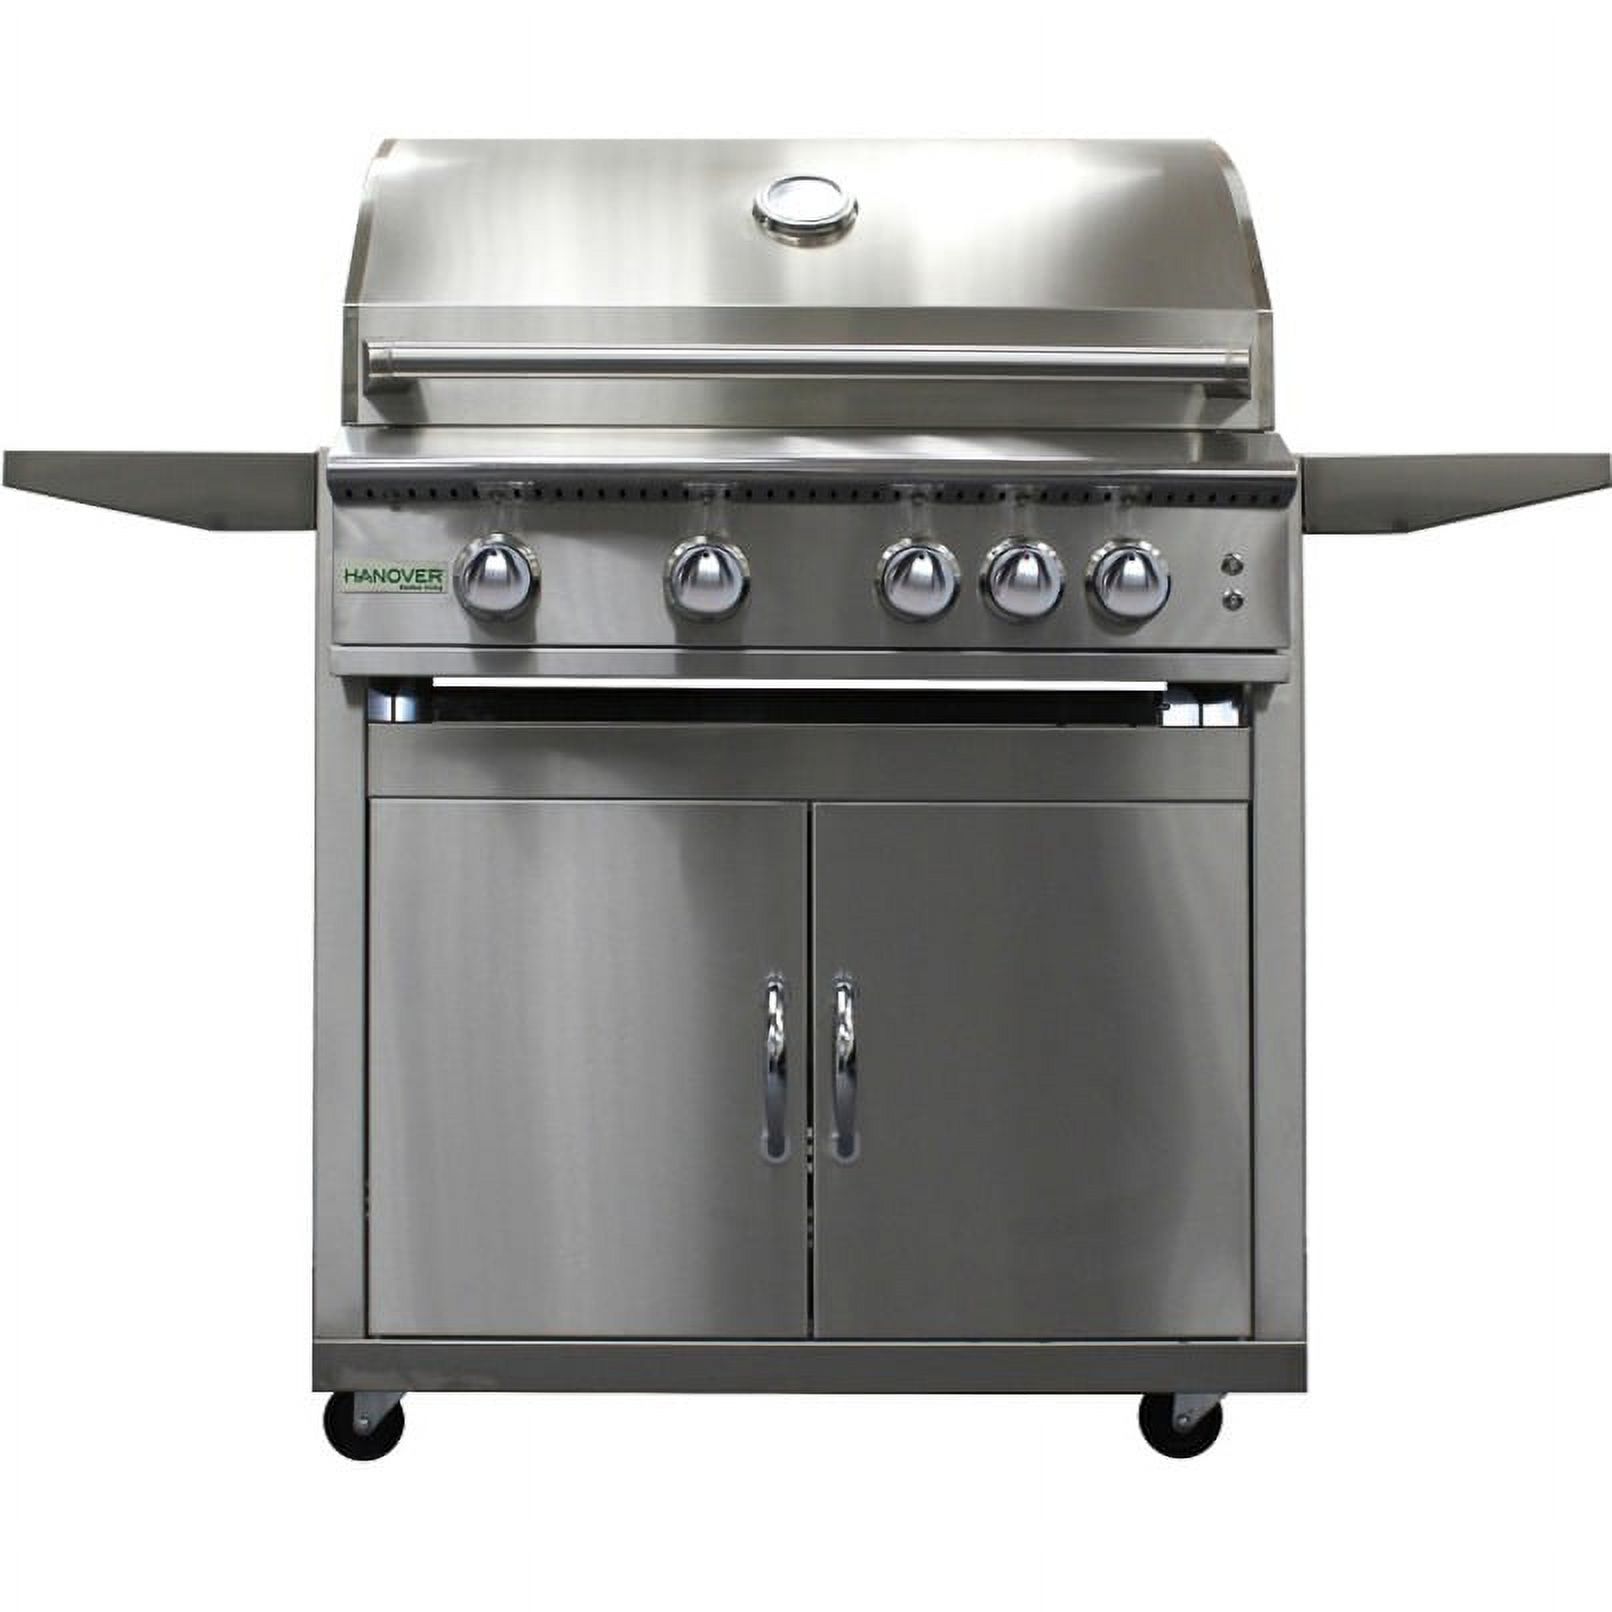 Hanover Grills 40" 5-Burner Liquid Propane Grill with Cart - image 1 of 2